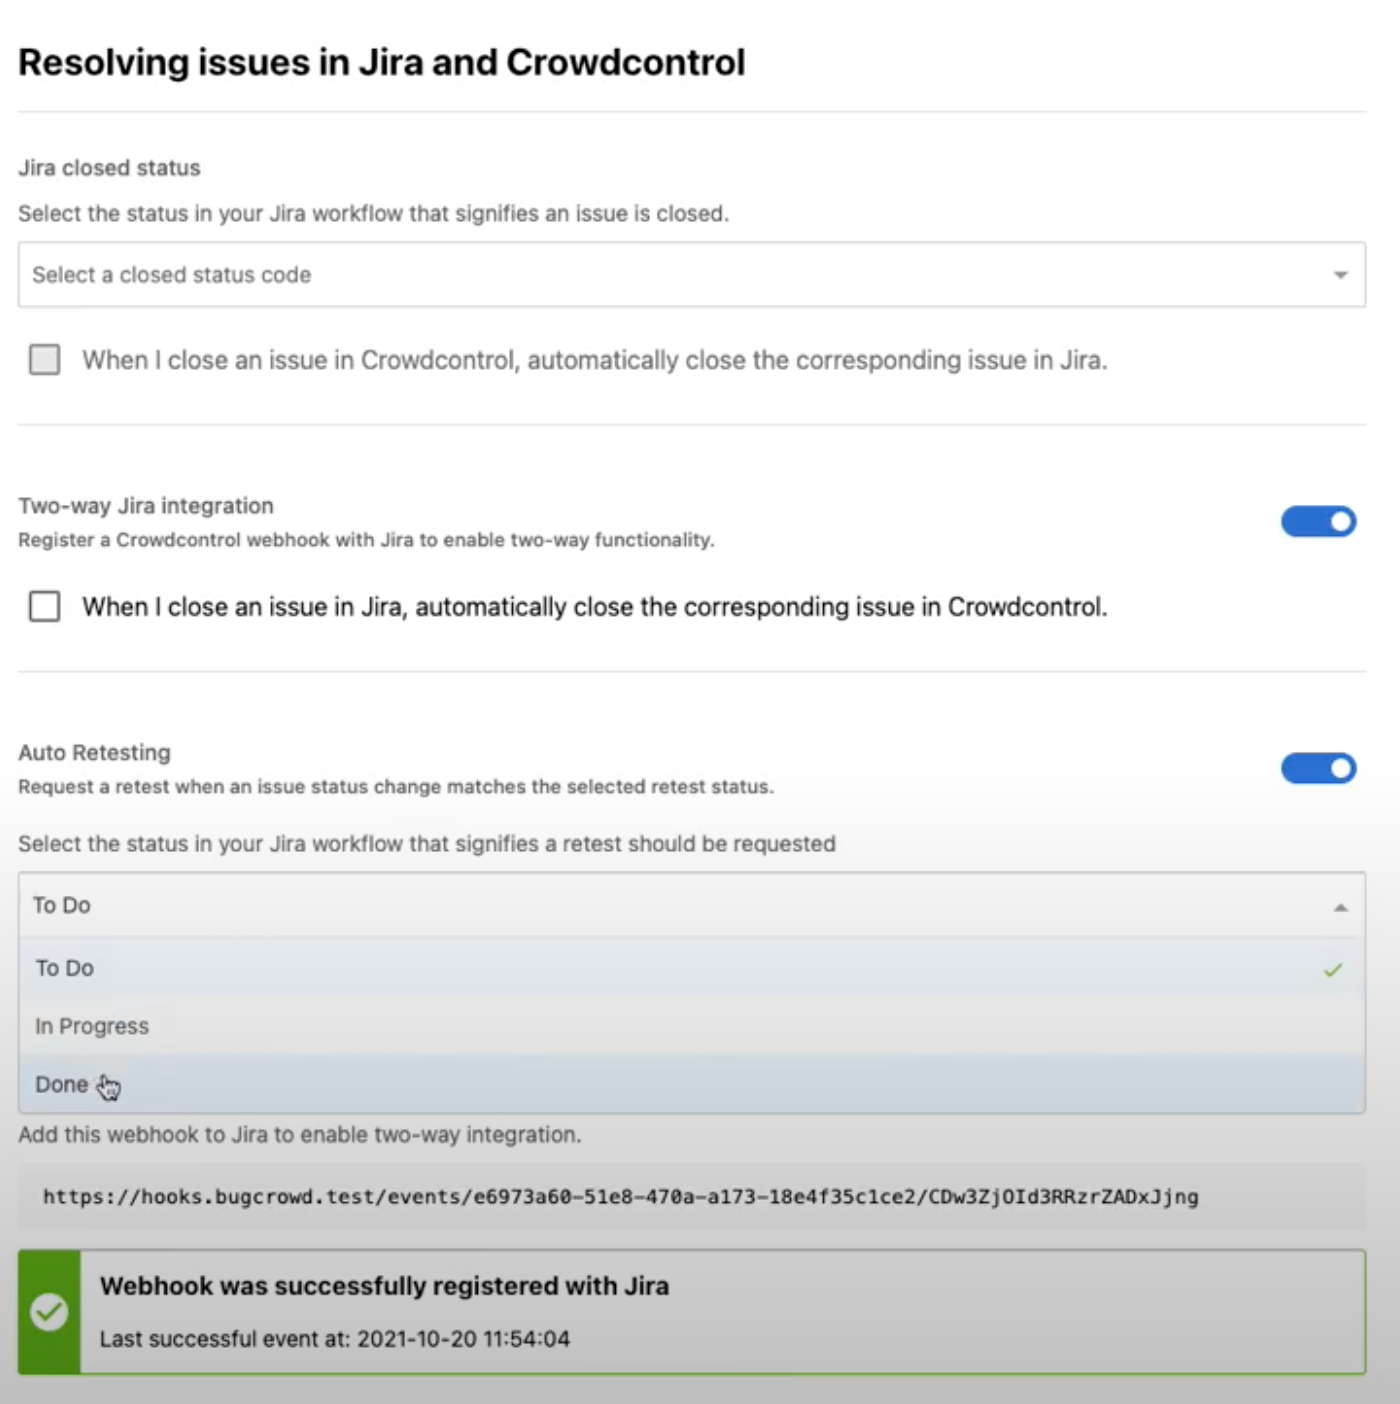 Select the status in your Jira workflow that must trigger a retest